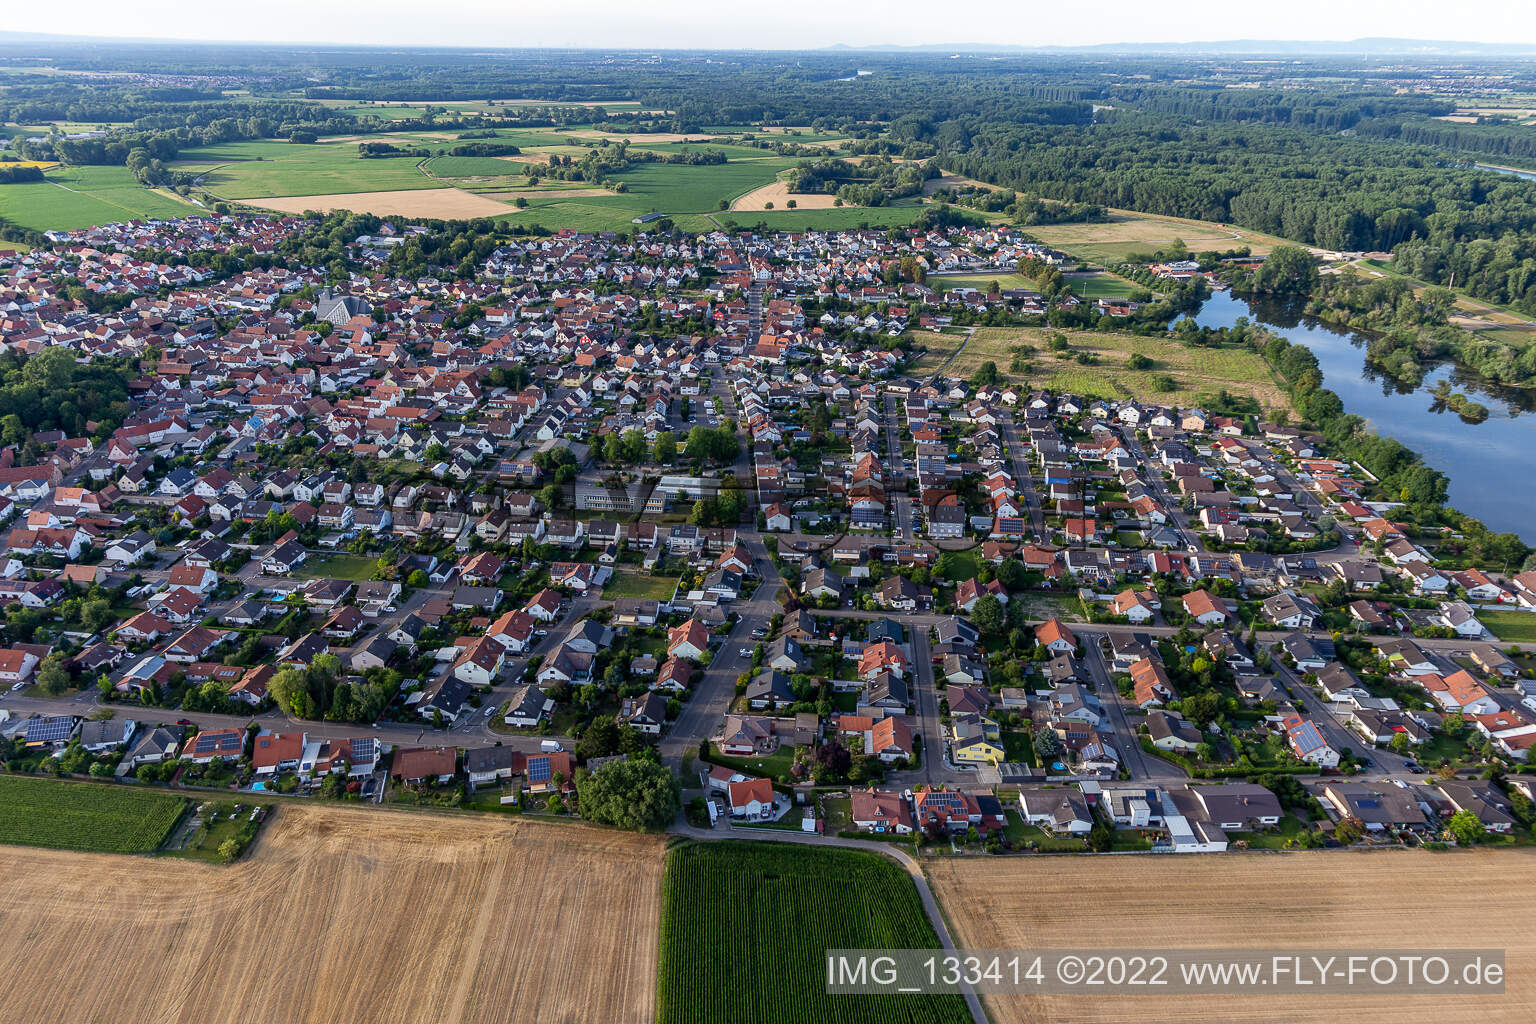 Leimersheim in the state Rhineland-Palatinate, Germany from above